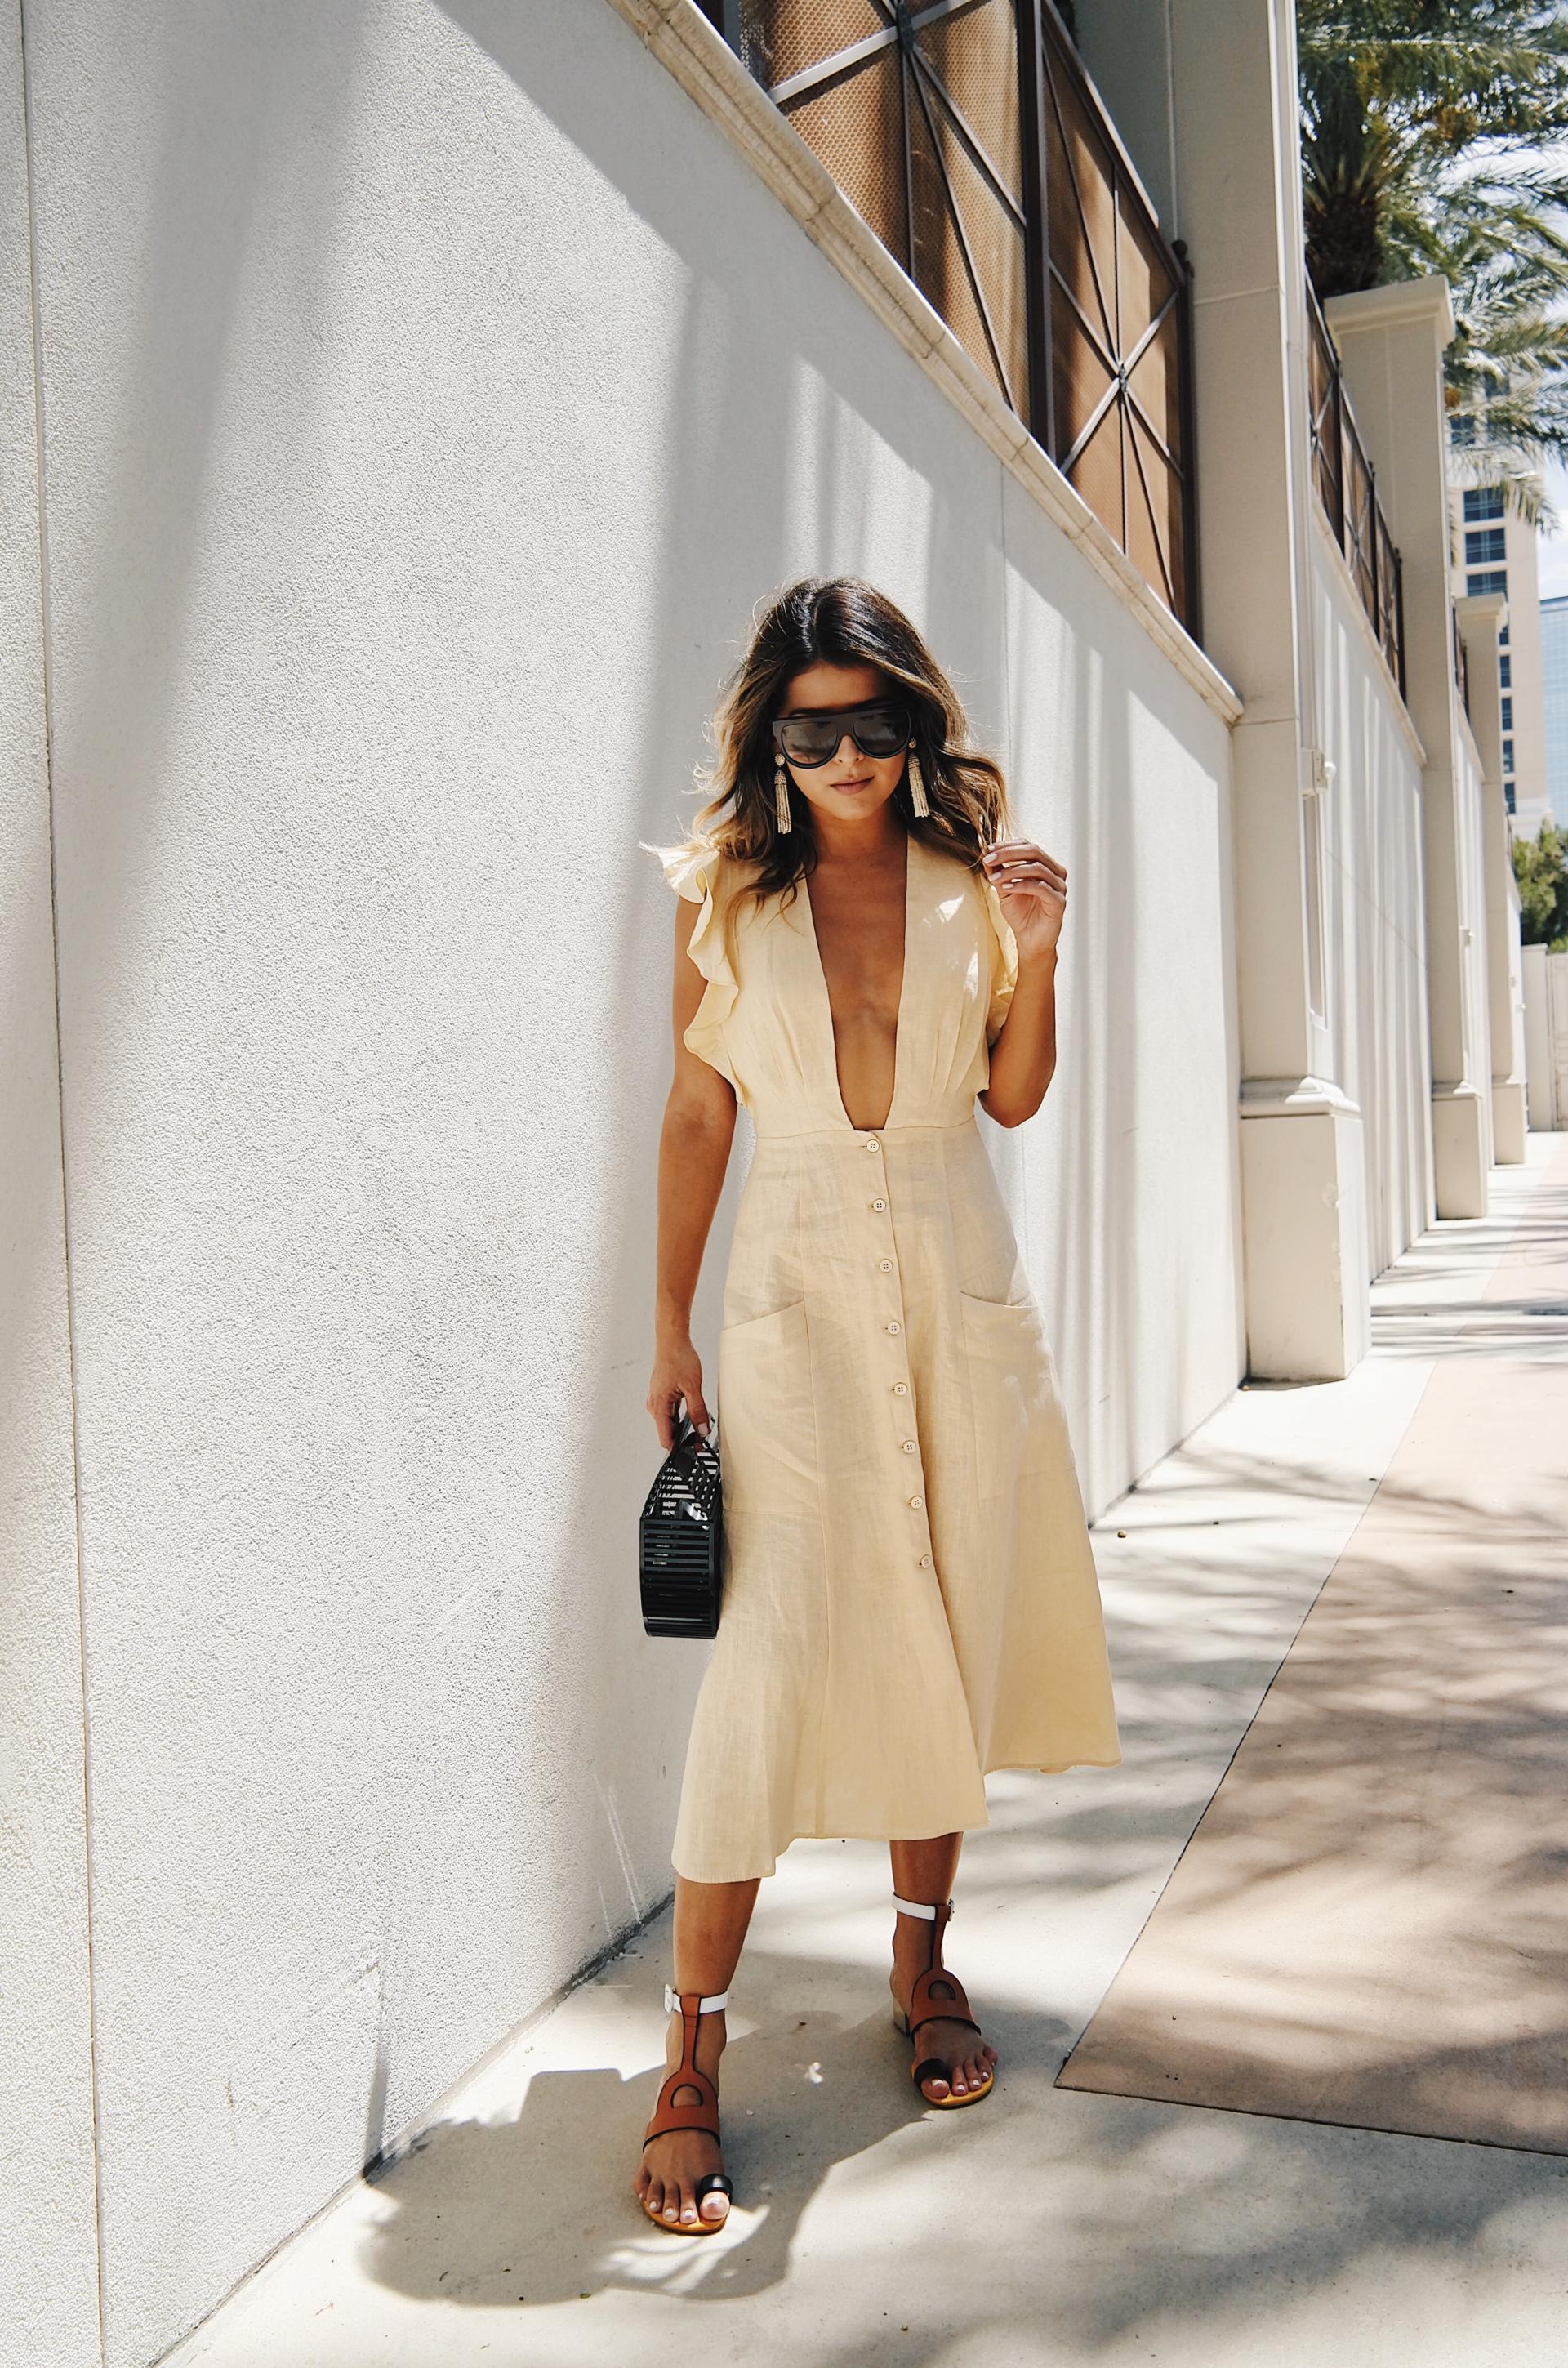 5 Ways to Look Stylish in Las Vegas - The Girl from Panama